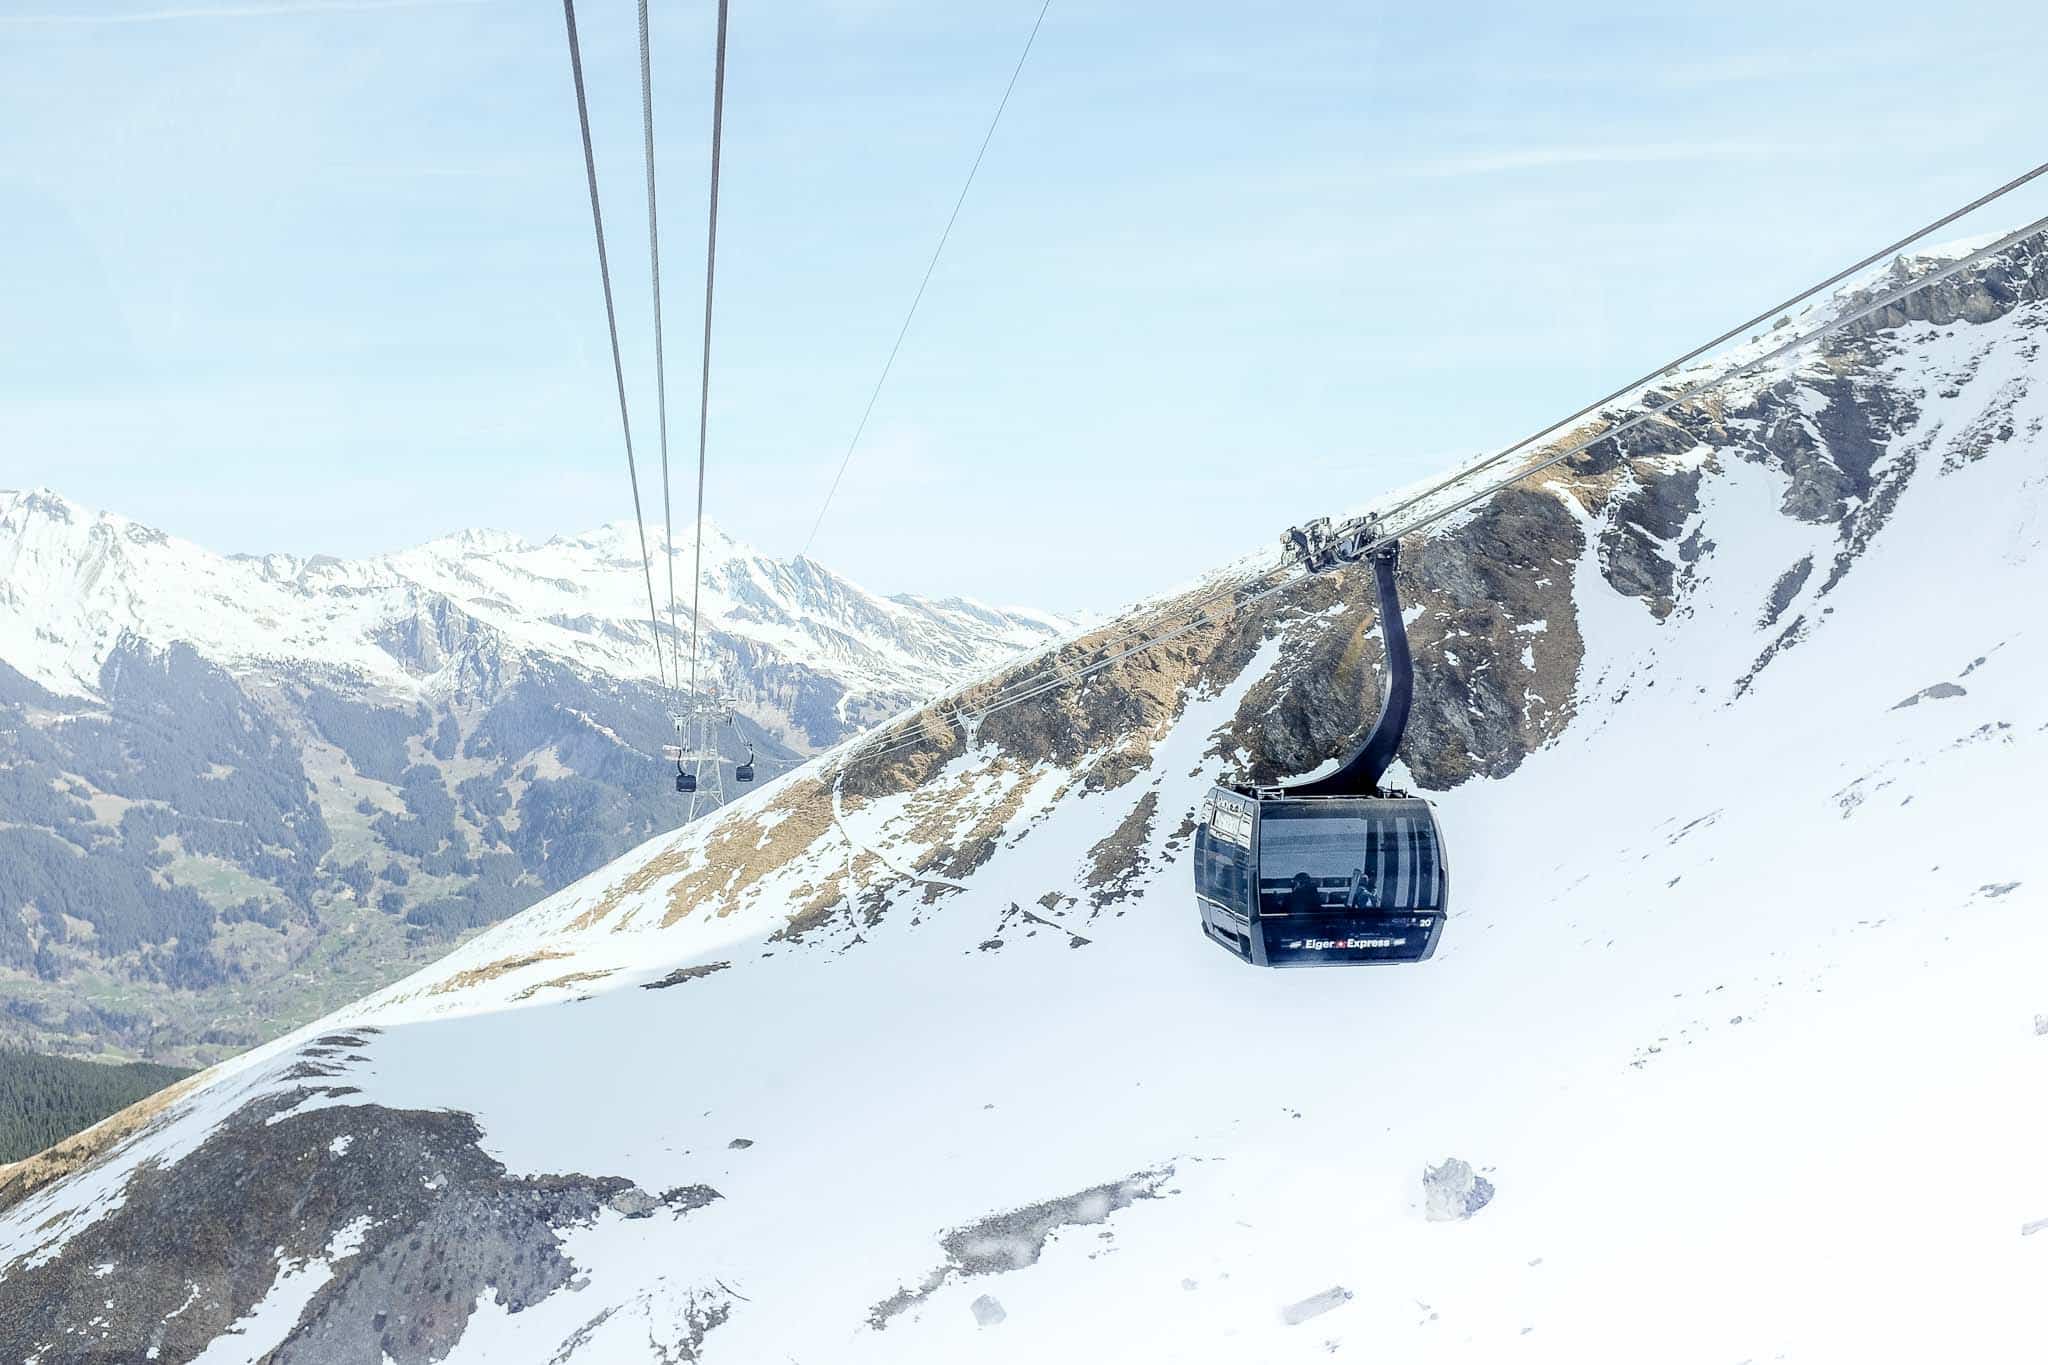 The Eiger Express cable car